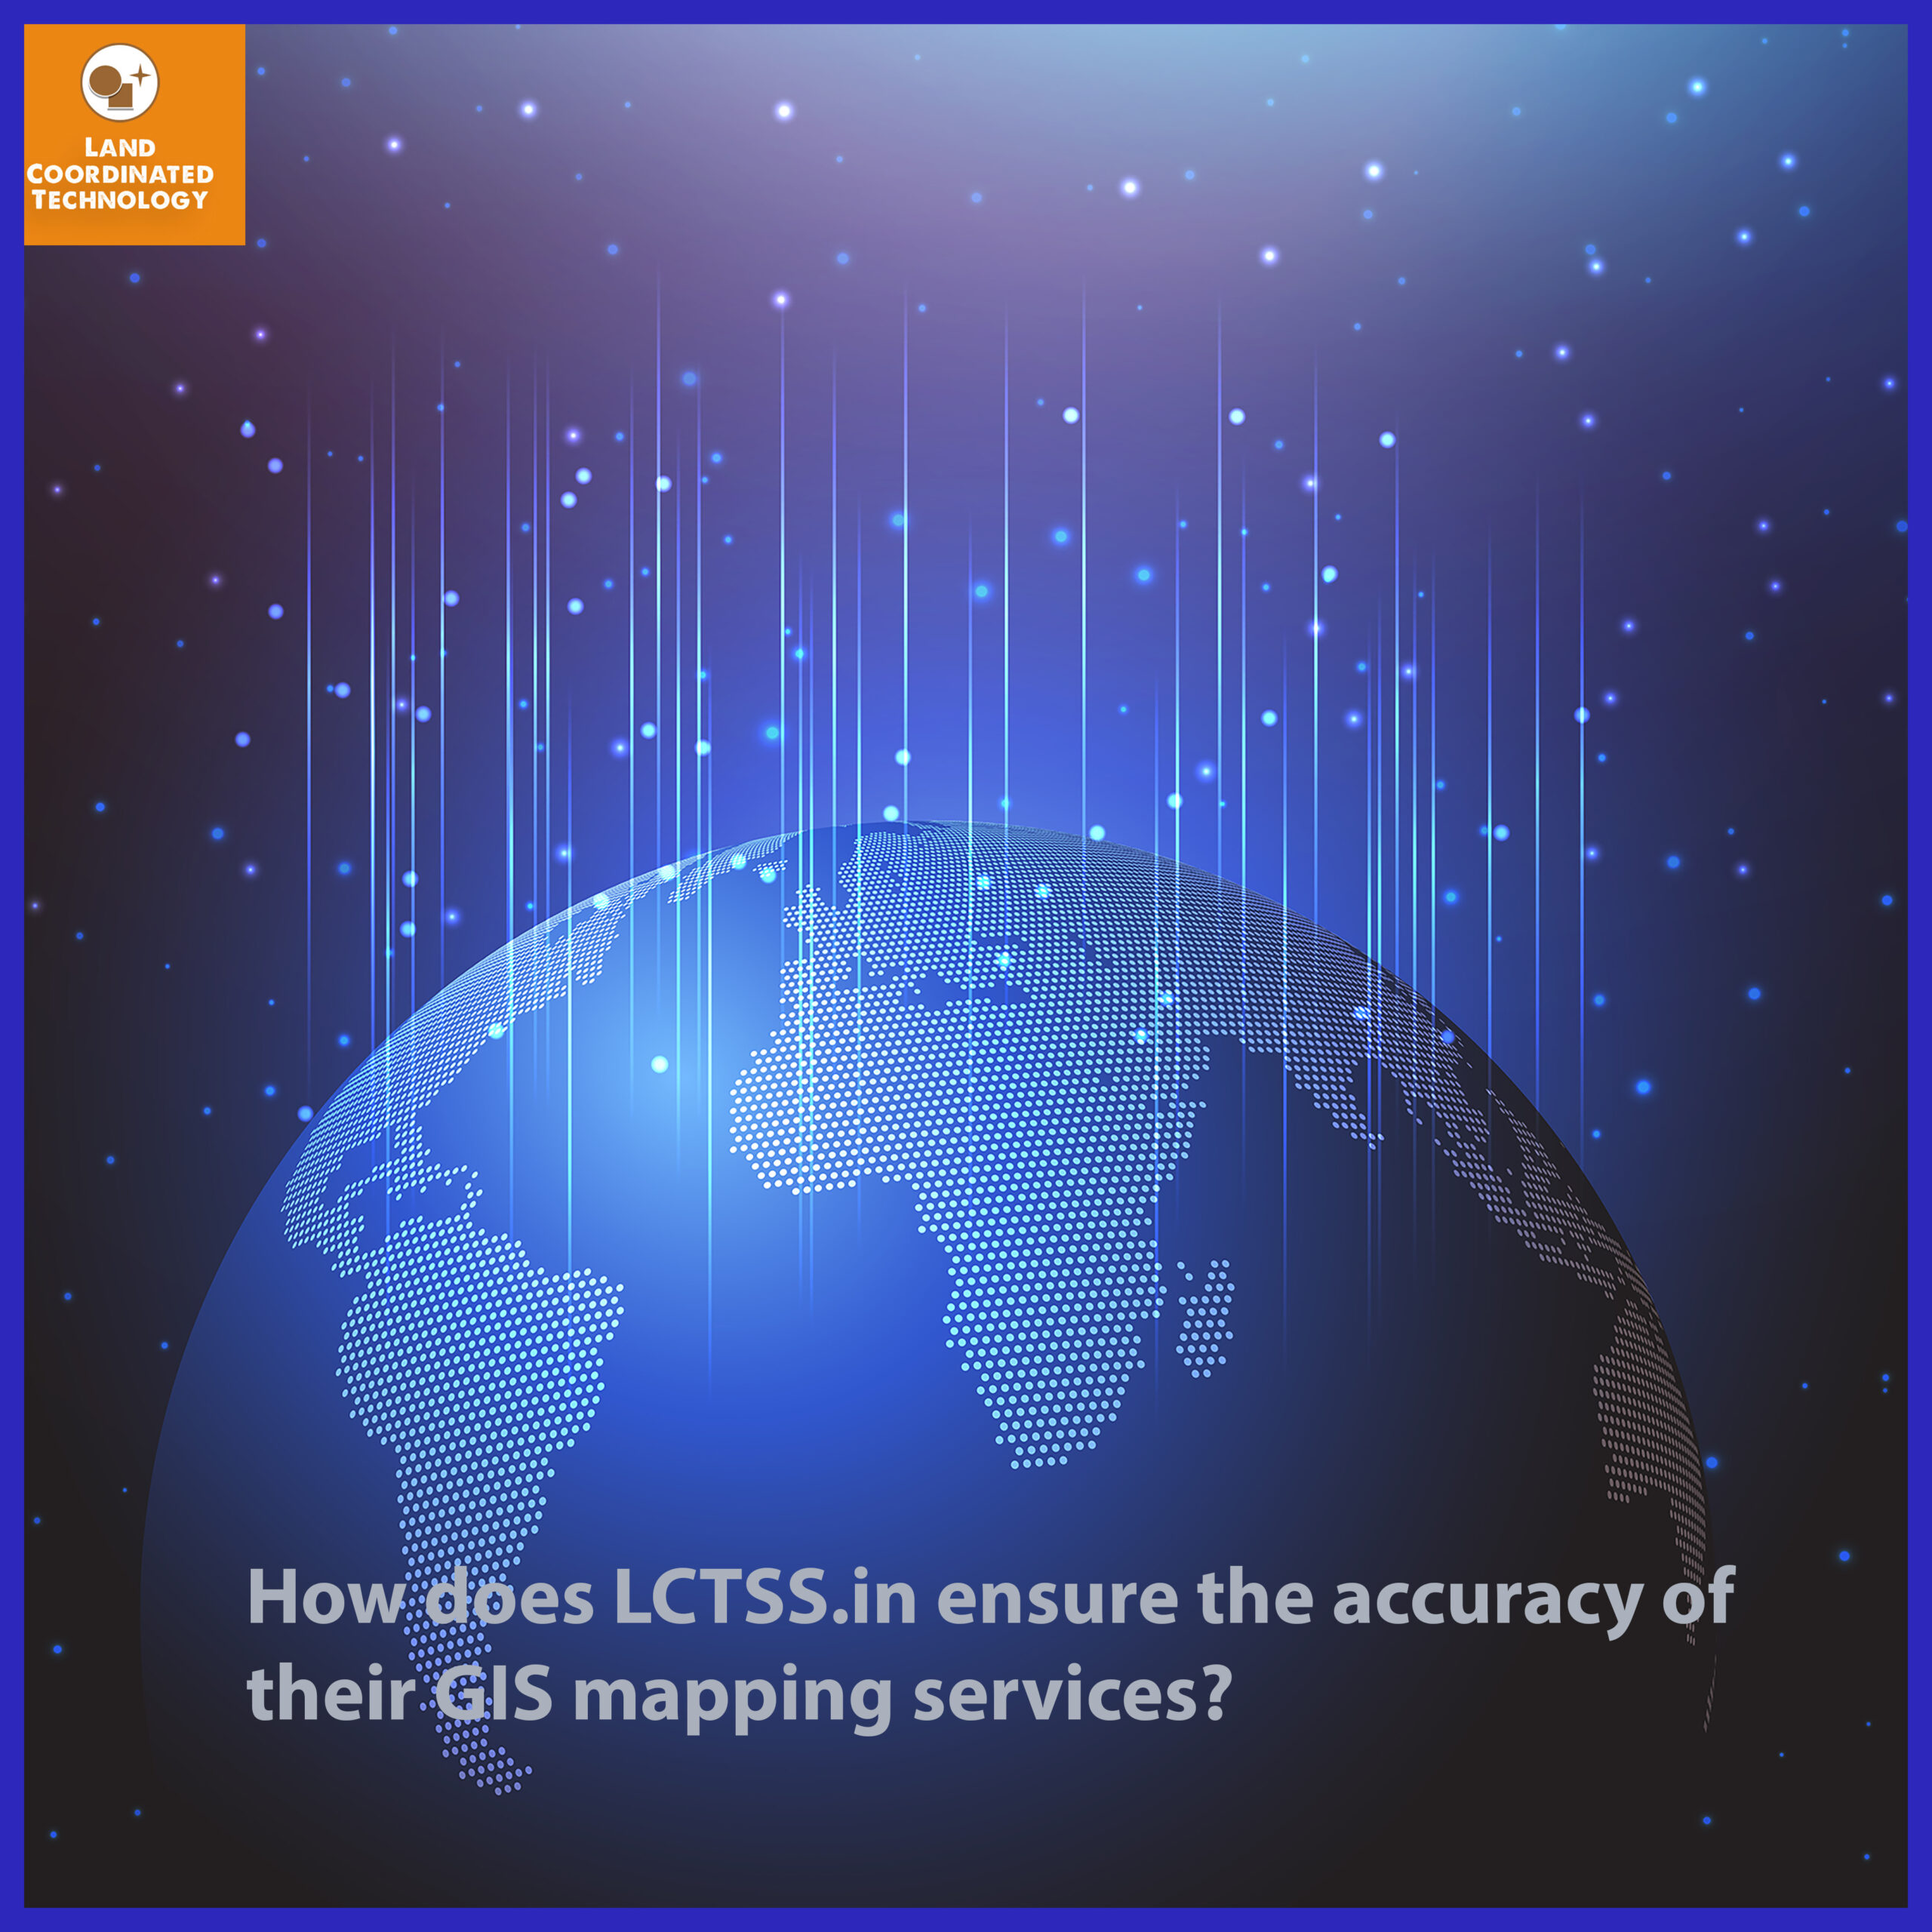 How does LCTSS.in ensure the accuracy of their GIS mapping services?